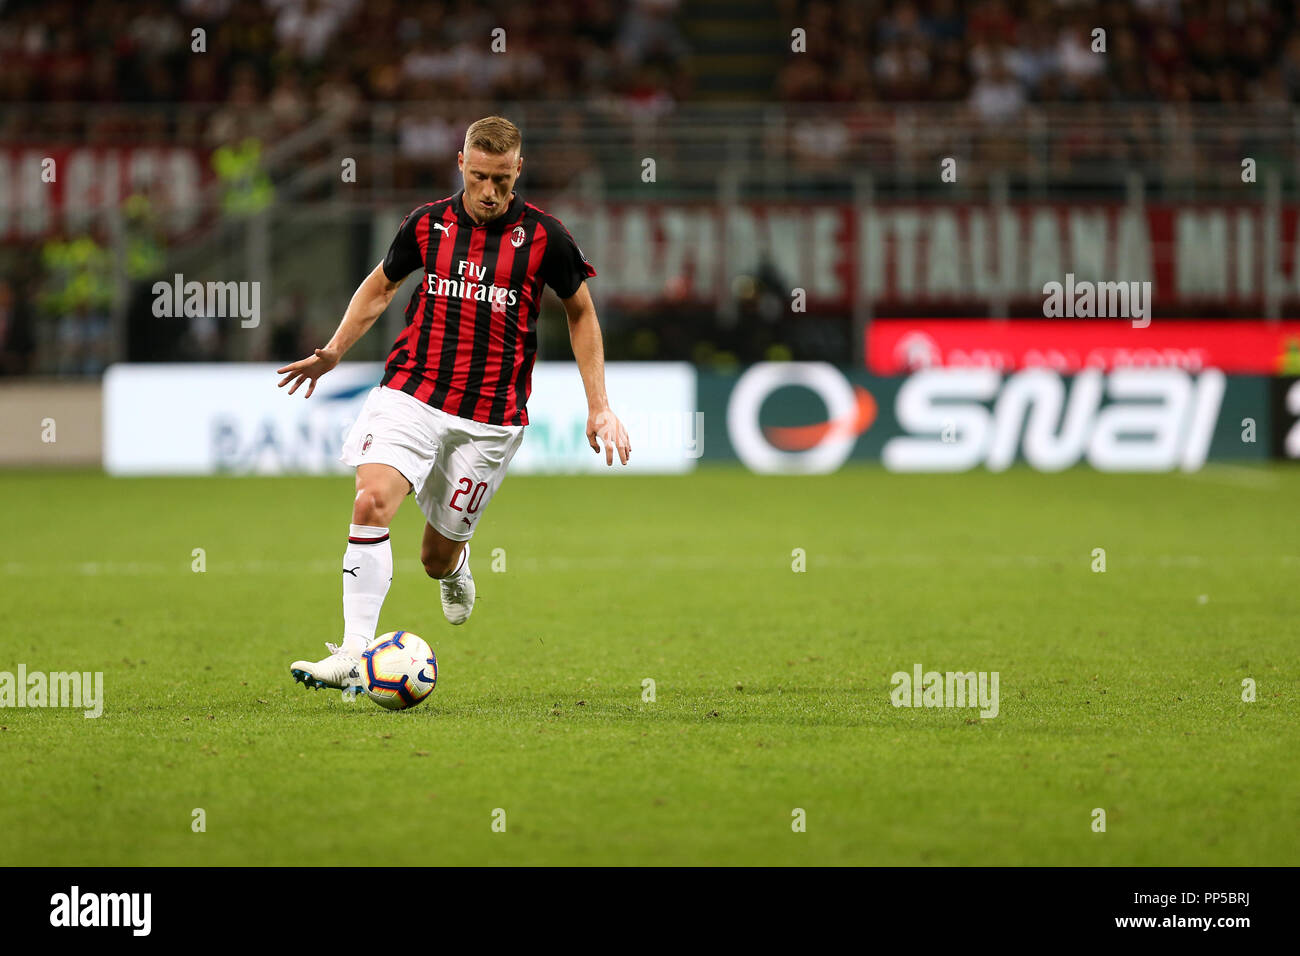 Milan, Italy. 23rd September, 2018. Ignazio Abate of Ac Milan  in action during the Serie A football match between AC Milan and Atalanta Bergamasca Calcio  . Credit: Marco Canoniero/Alamy Live News Stock Photo